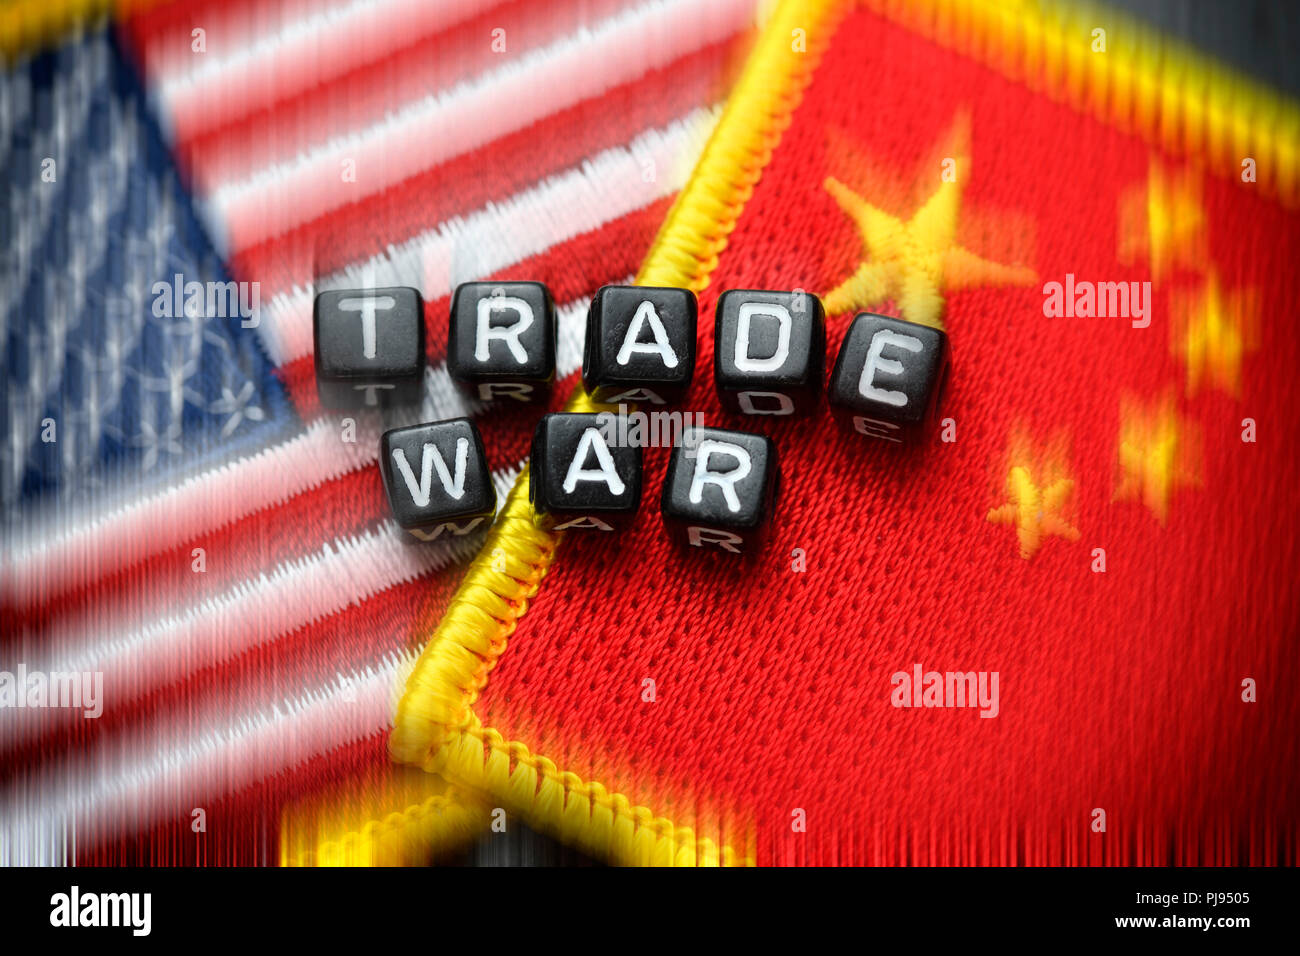 Flags of the USA and China with the stroke Trade Being, commercial war, Flaggen von USA und China mit dem Schriftzug Trade War, Handelskrieg Stock Photo